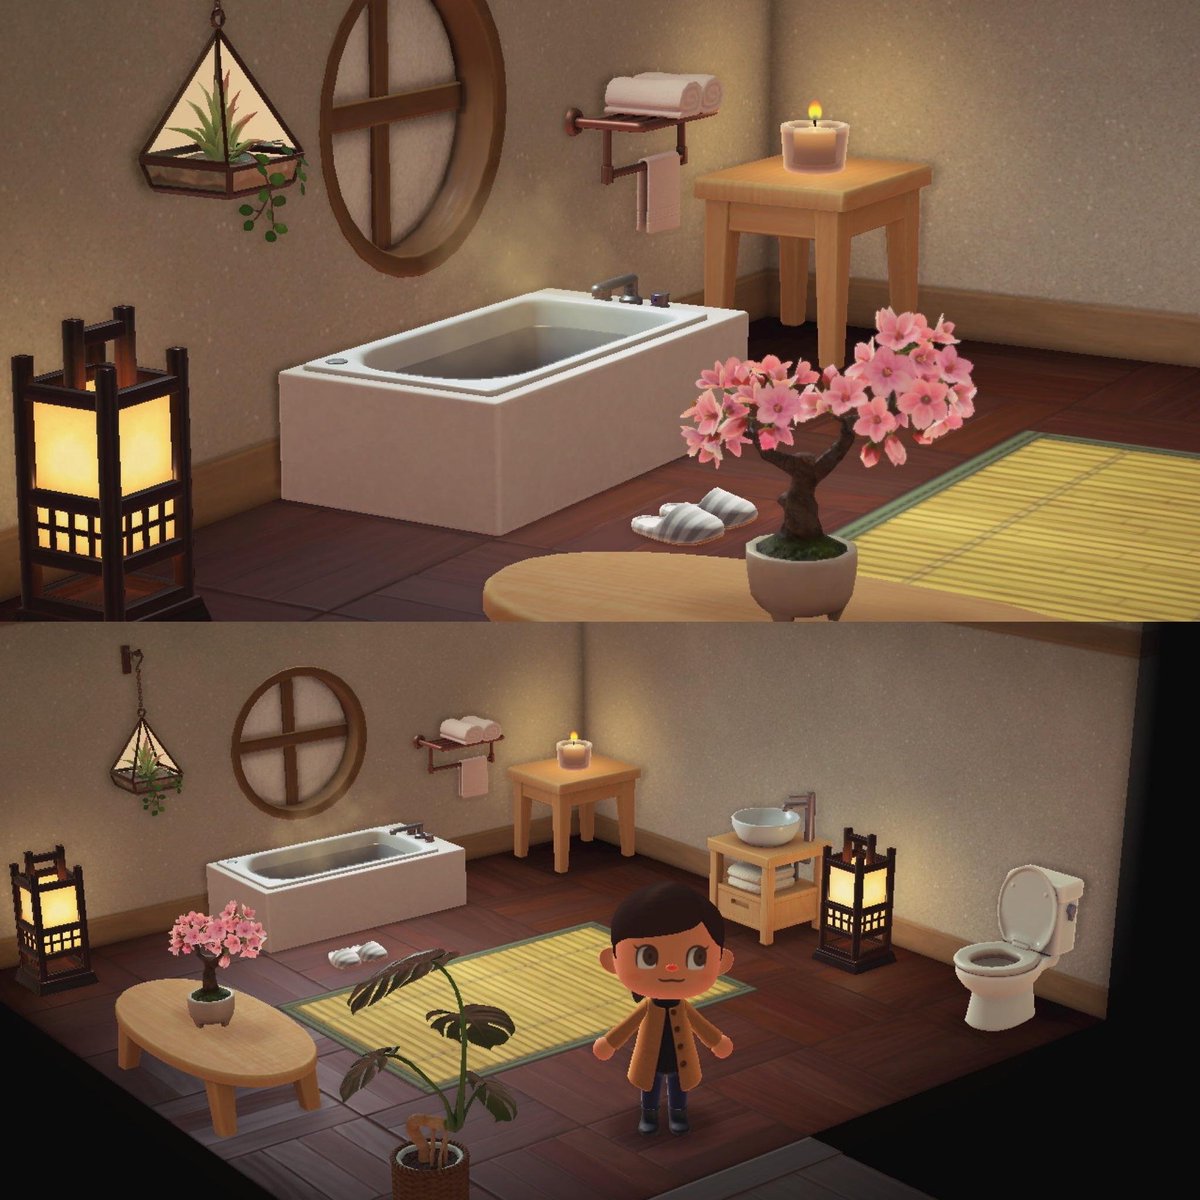 33. Une salle de bain cosy (Source :  https://www.reddit.com/r/AnimalCrossing/comments/fyib74/time_to_whine_down_soak_up_the_suds/)